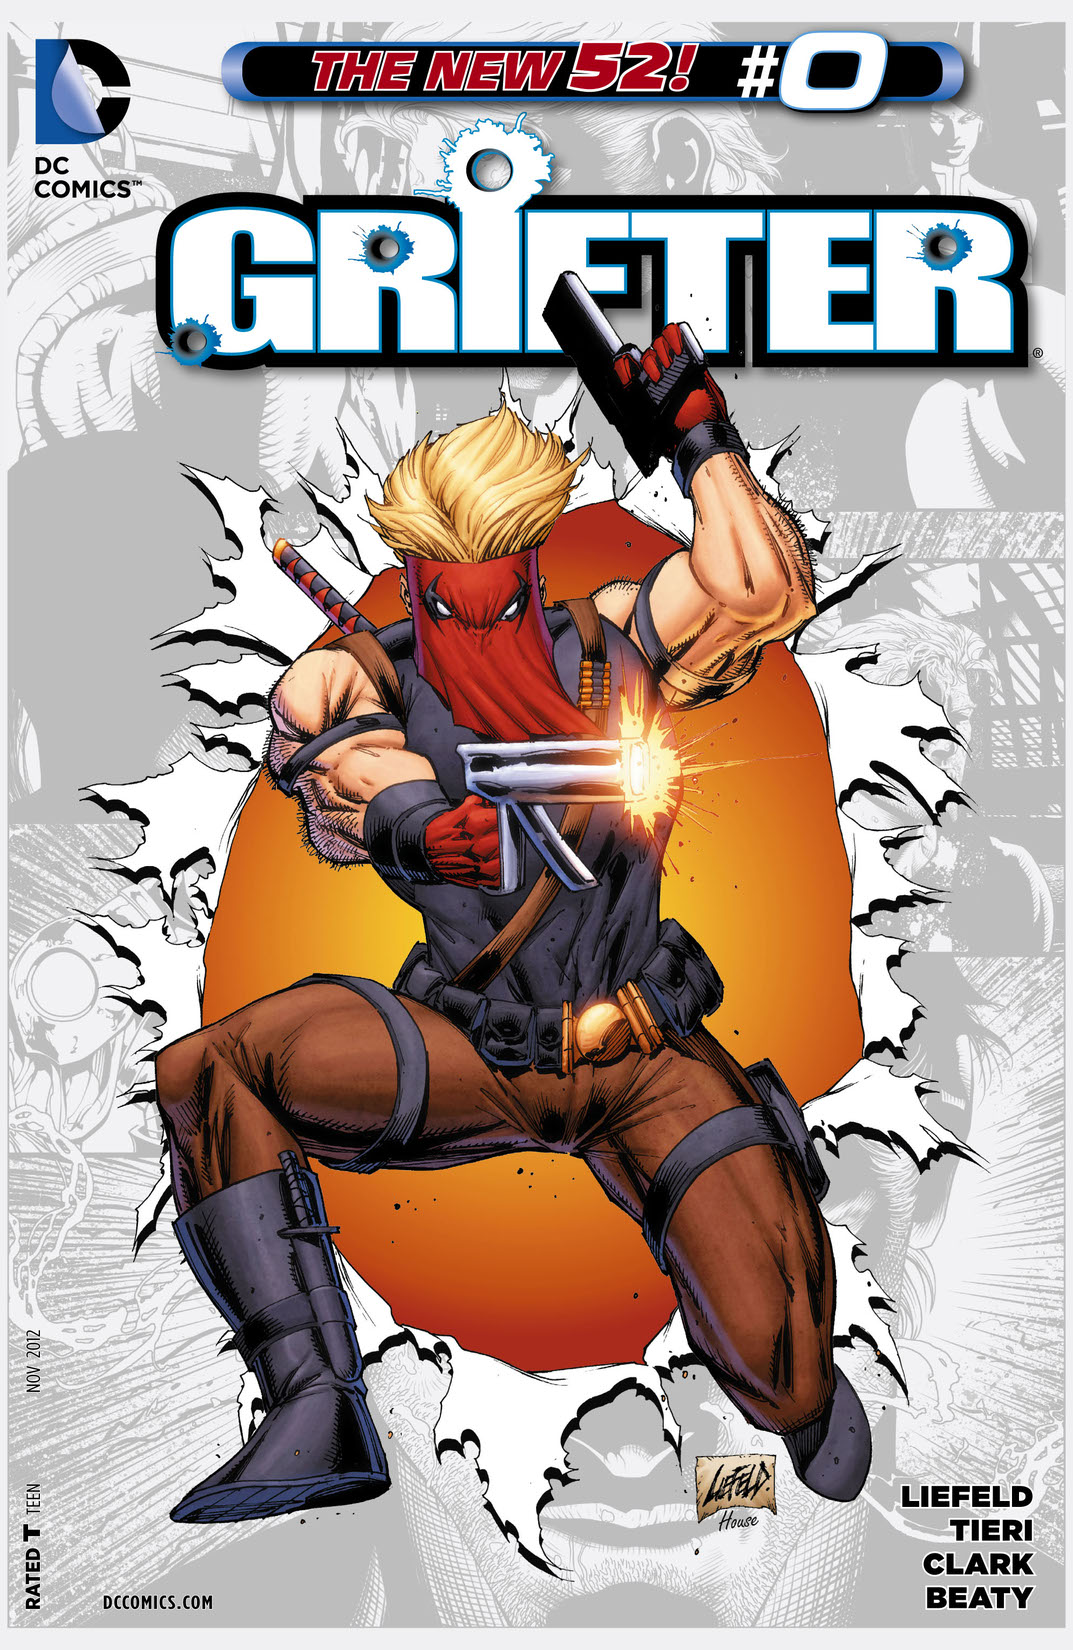 Grifter (2011-2013) #0 preview images